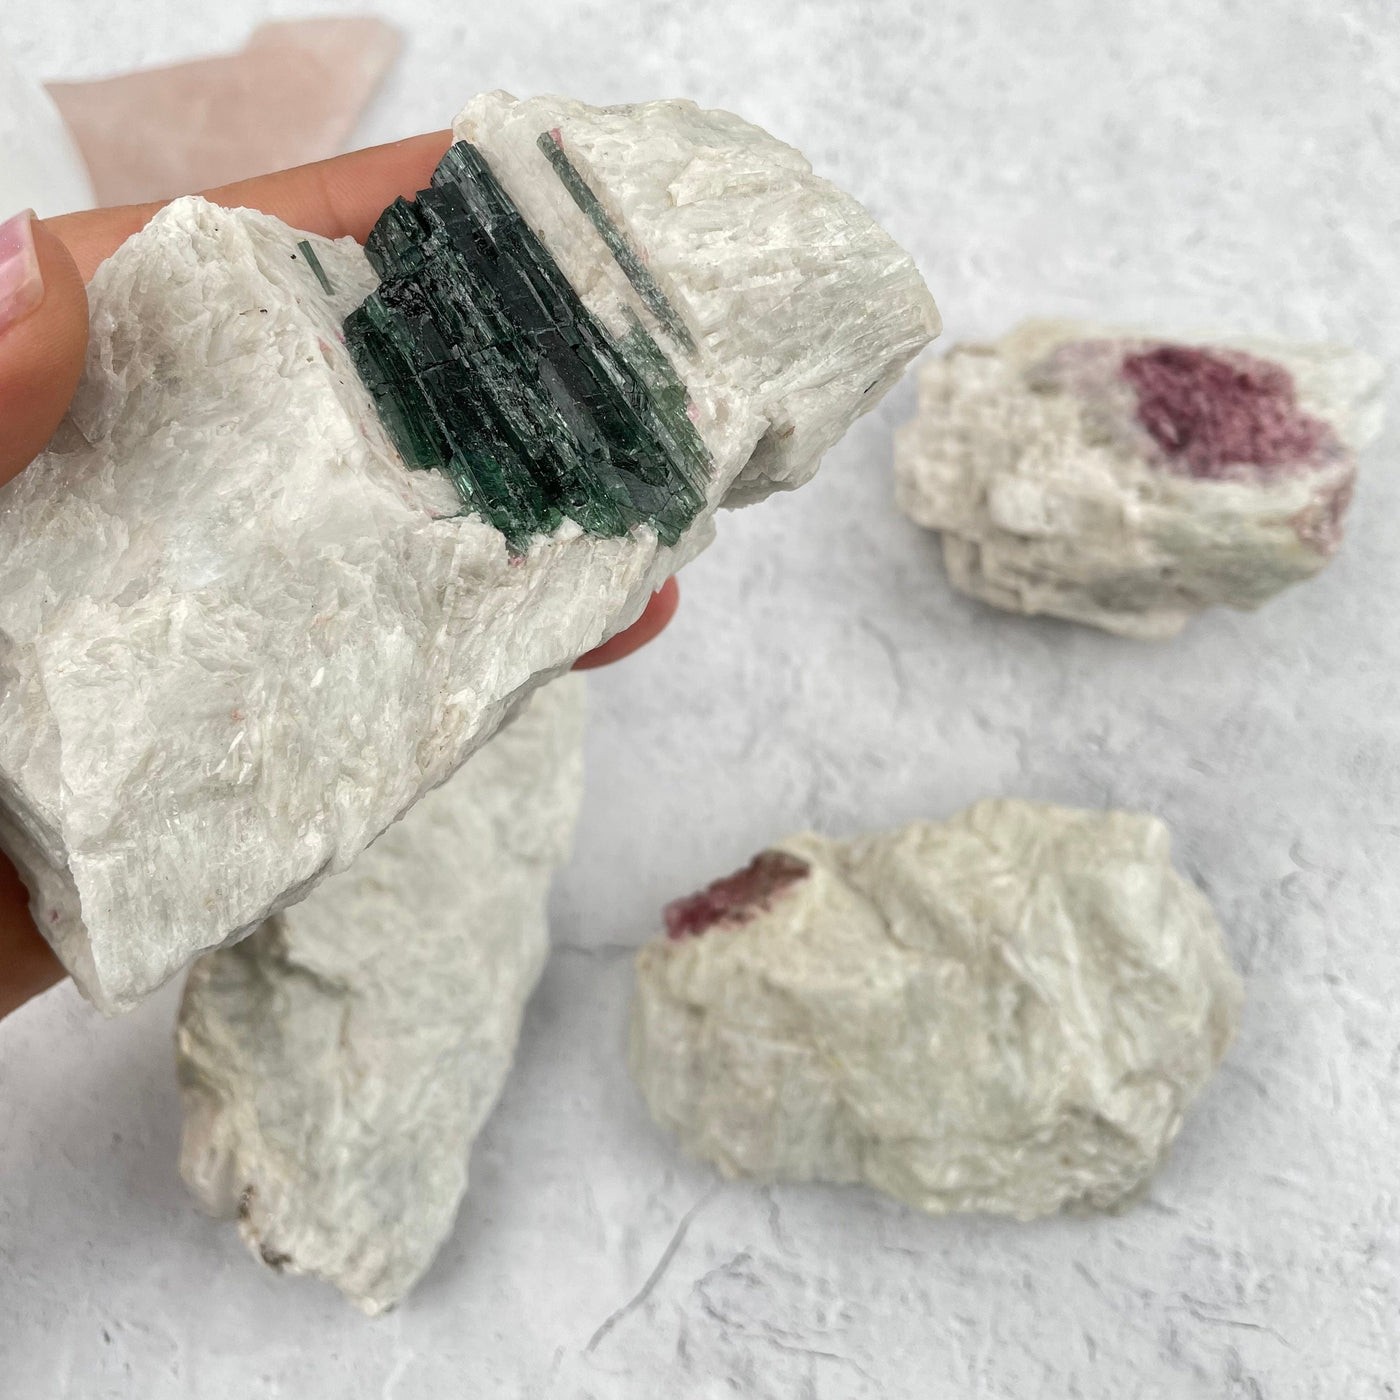 Watermelon Tourmaline freeform in hand for size reference 